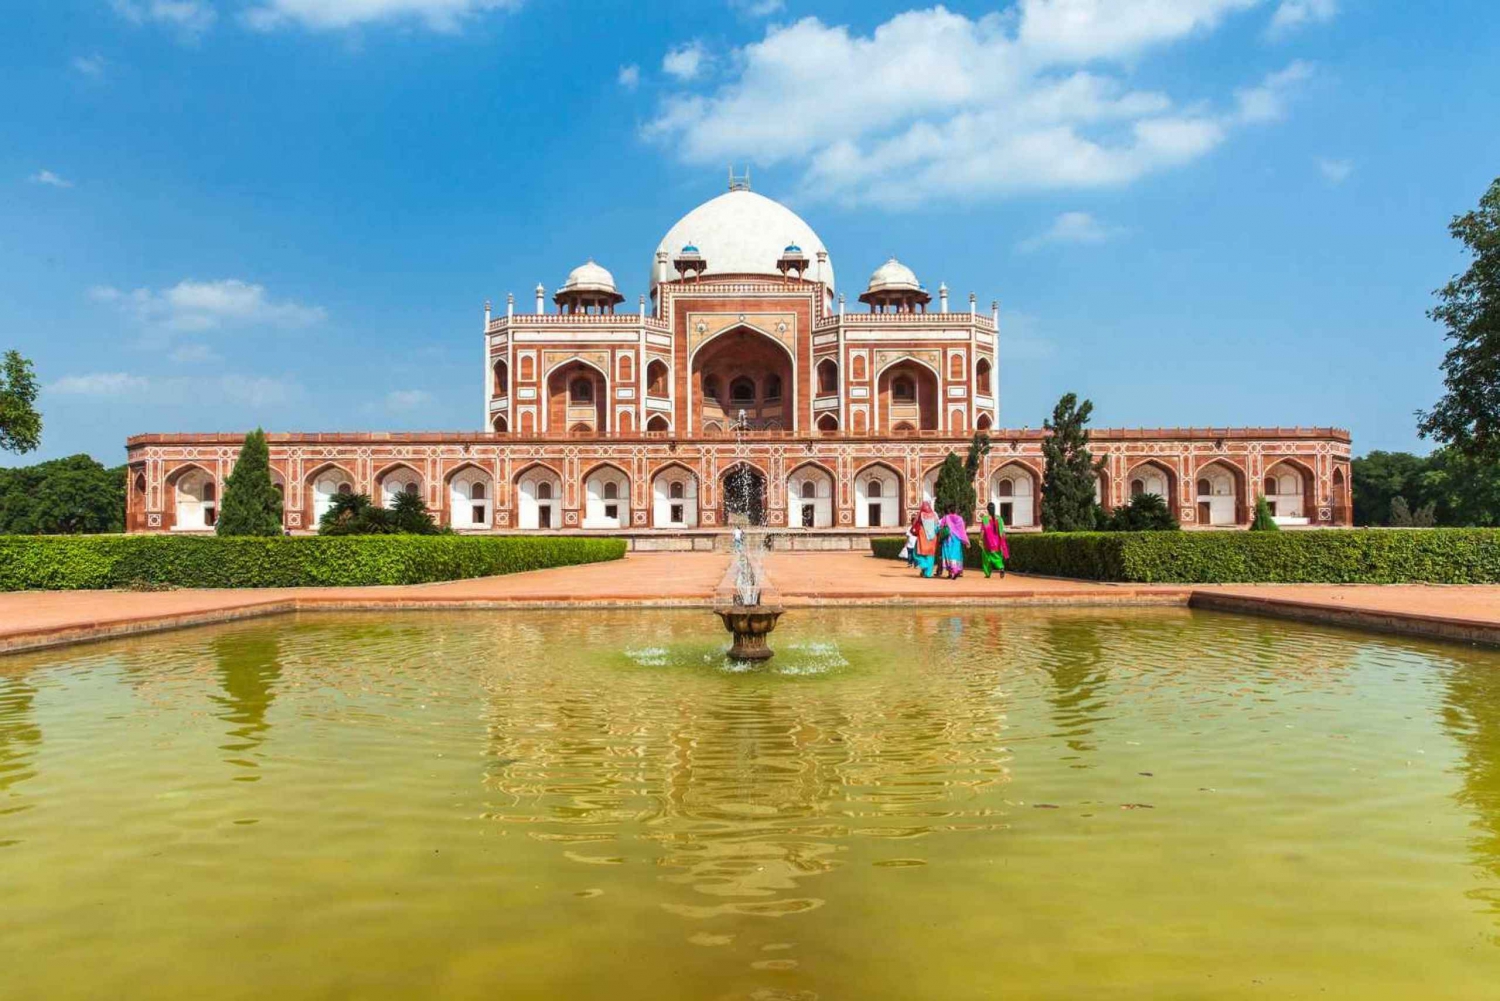 From Jaipur: Private 4-Day Tour to Jaipur, Agra and Delhi